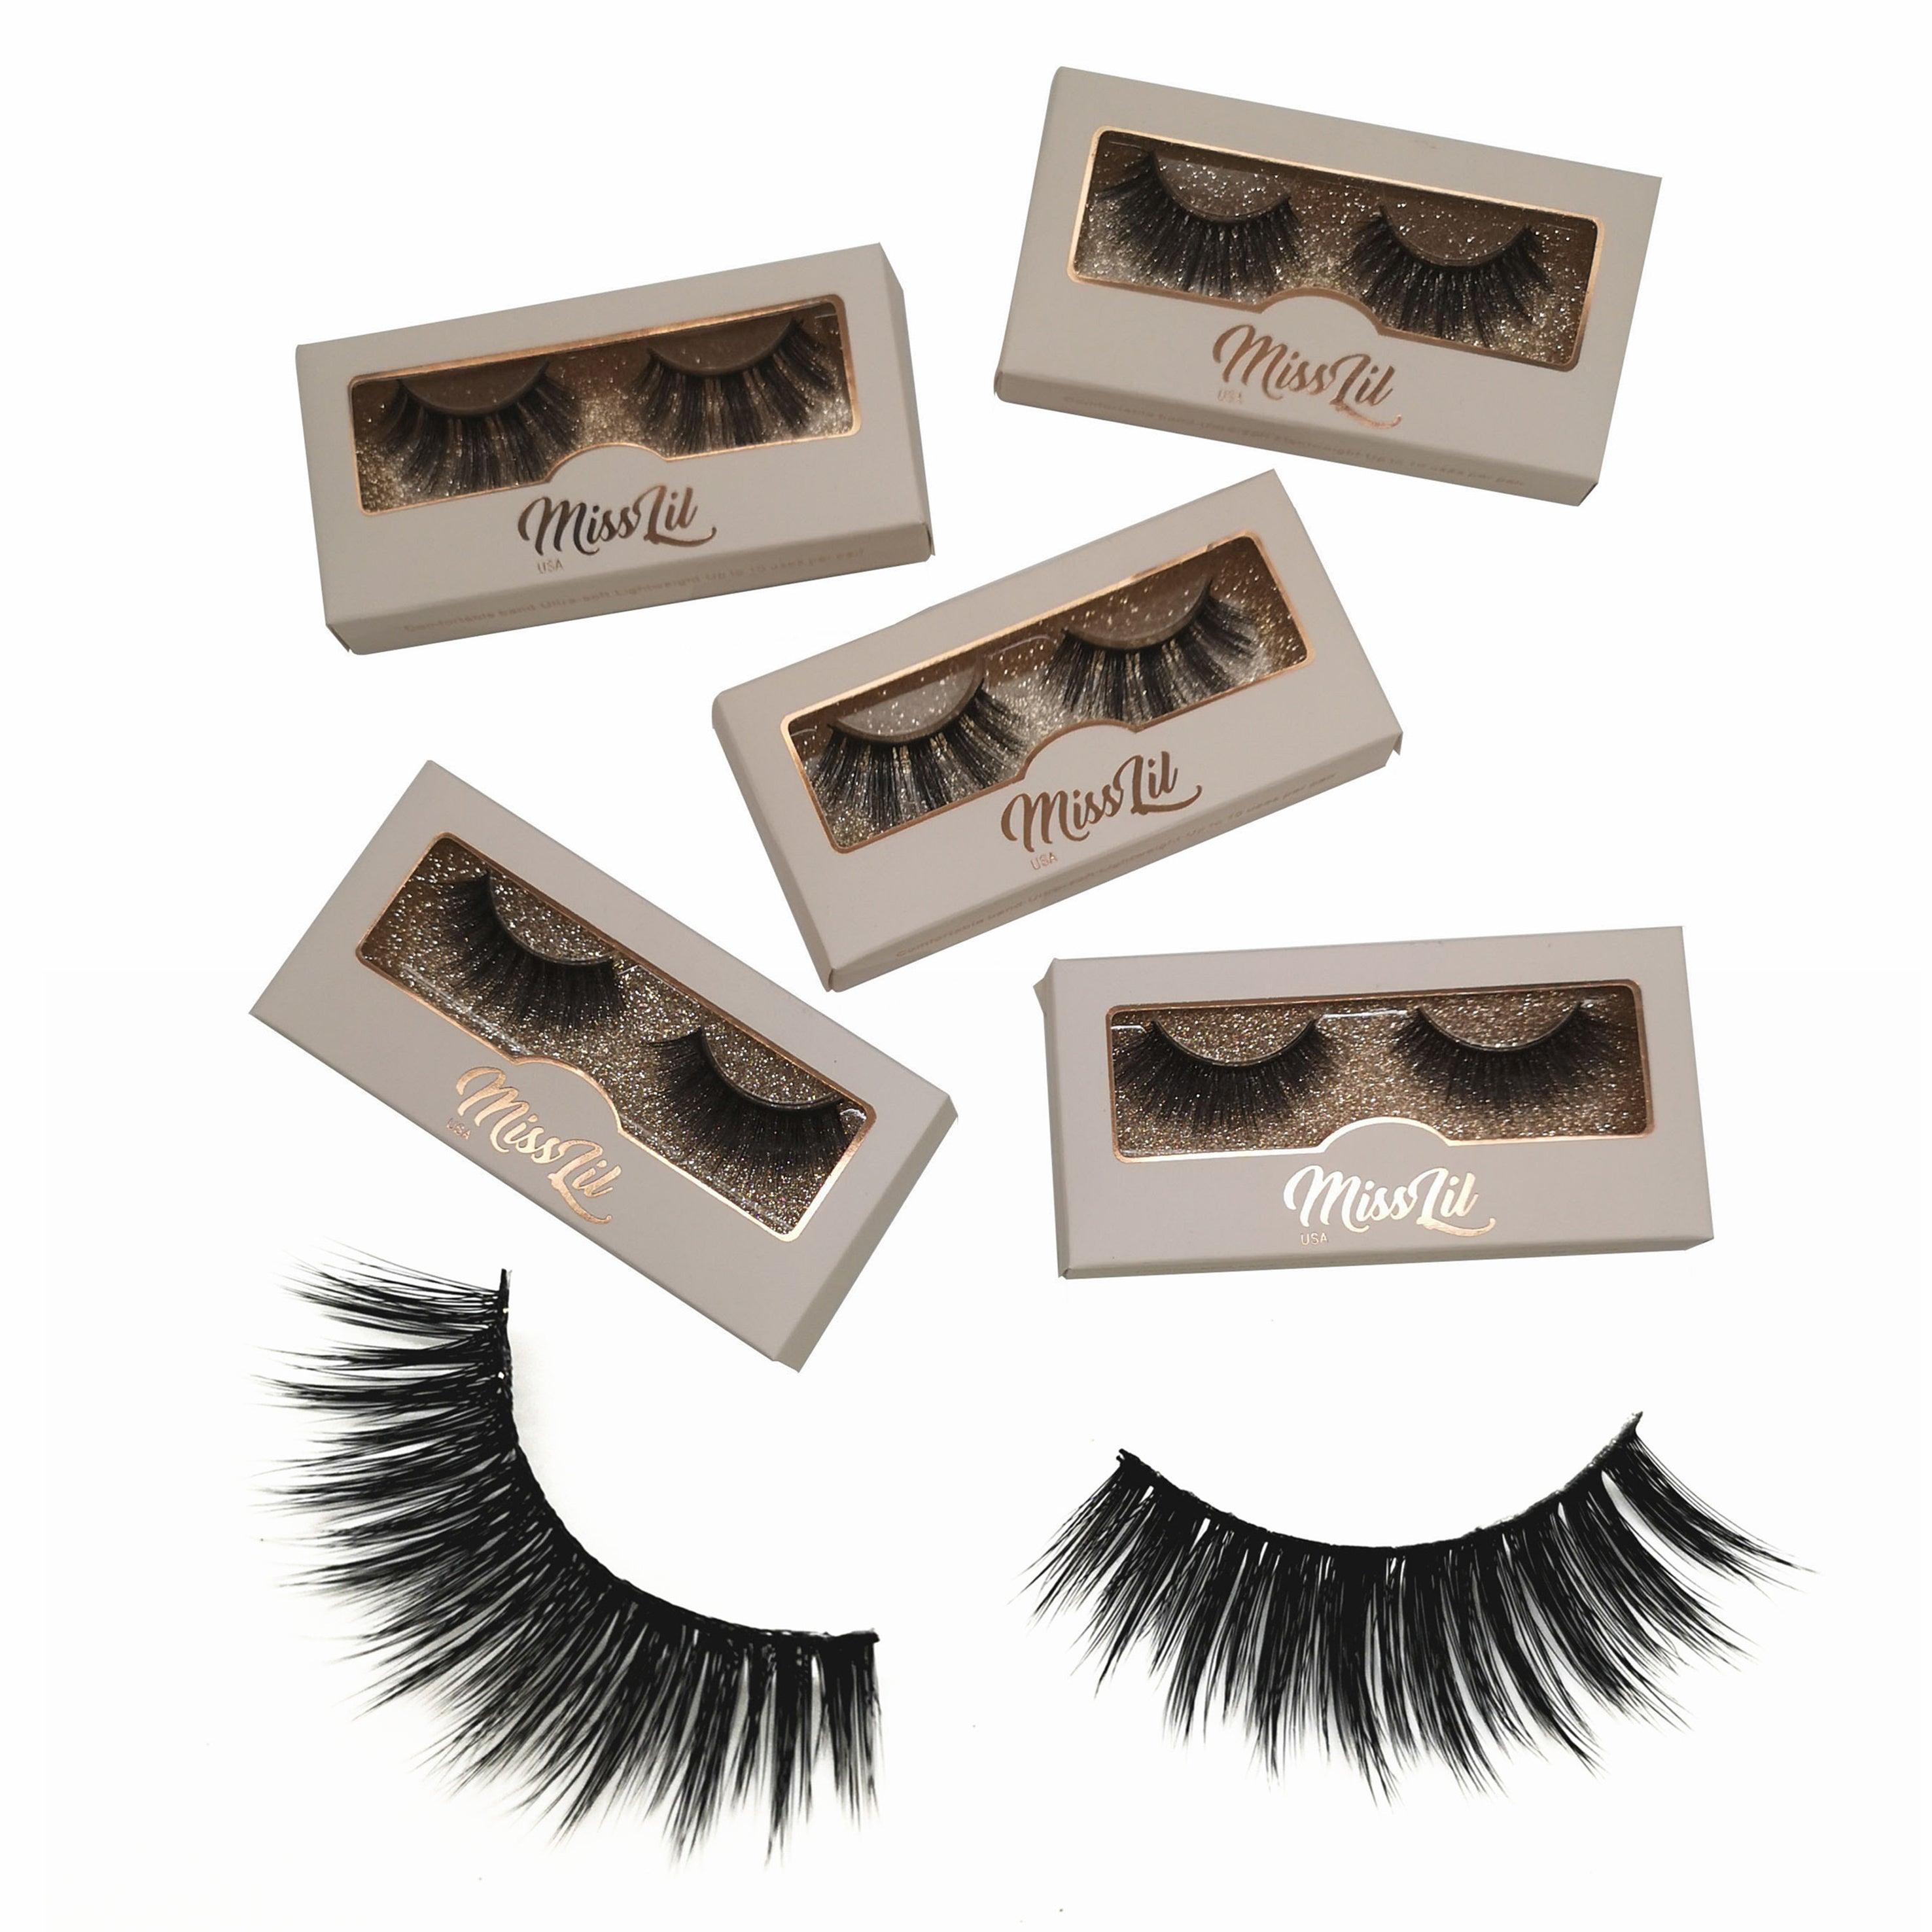 1 Pair Miss Lil USA Lashes #3 (Pack of 12) - Miss Lil USA Wholesale